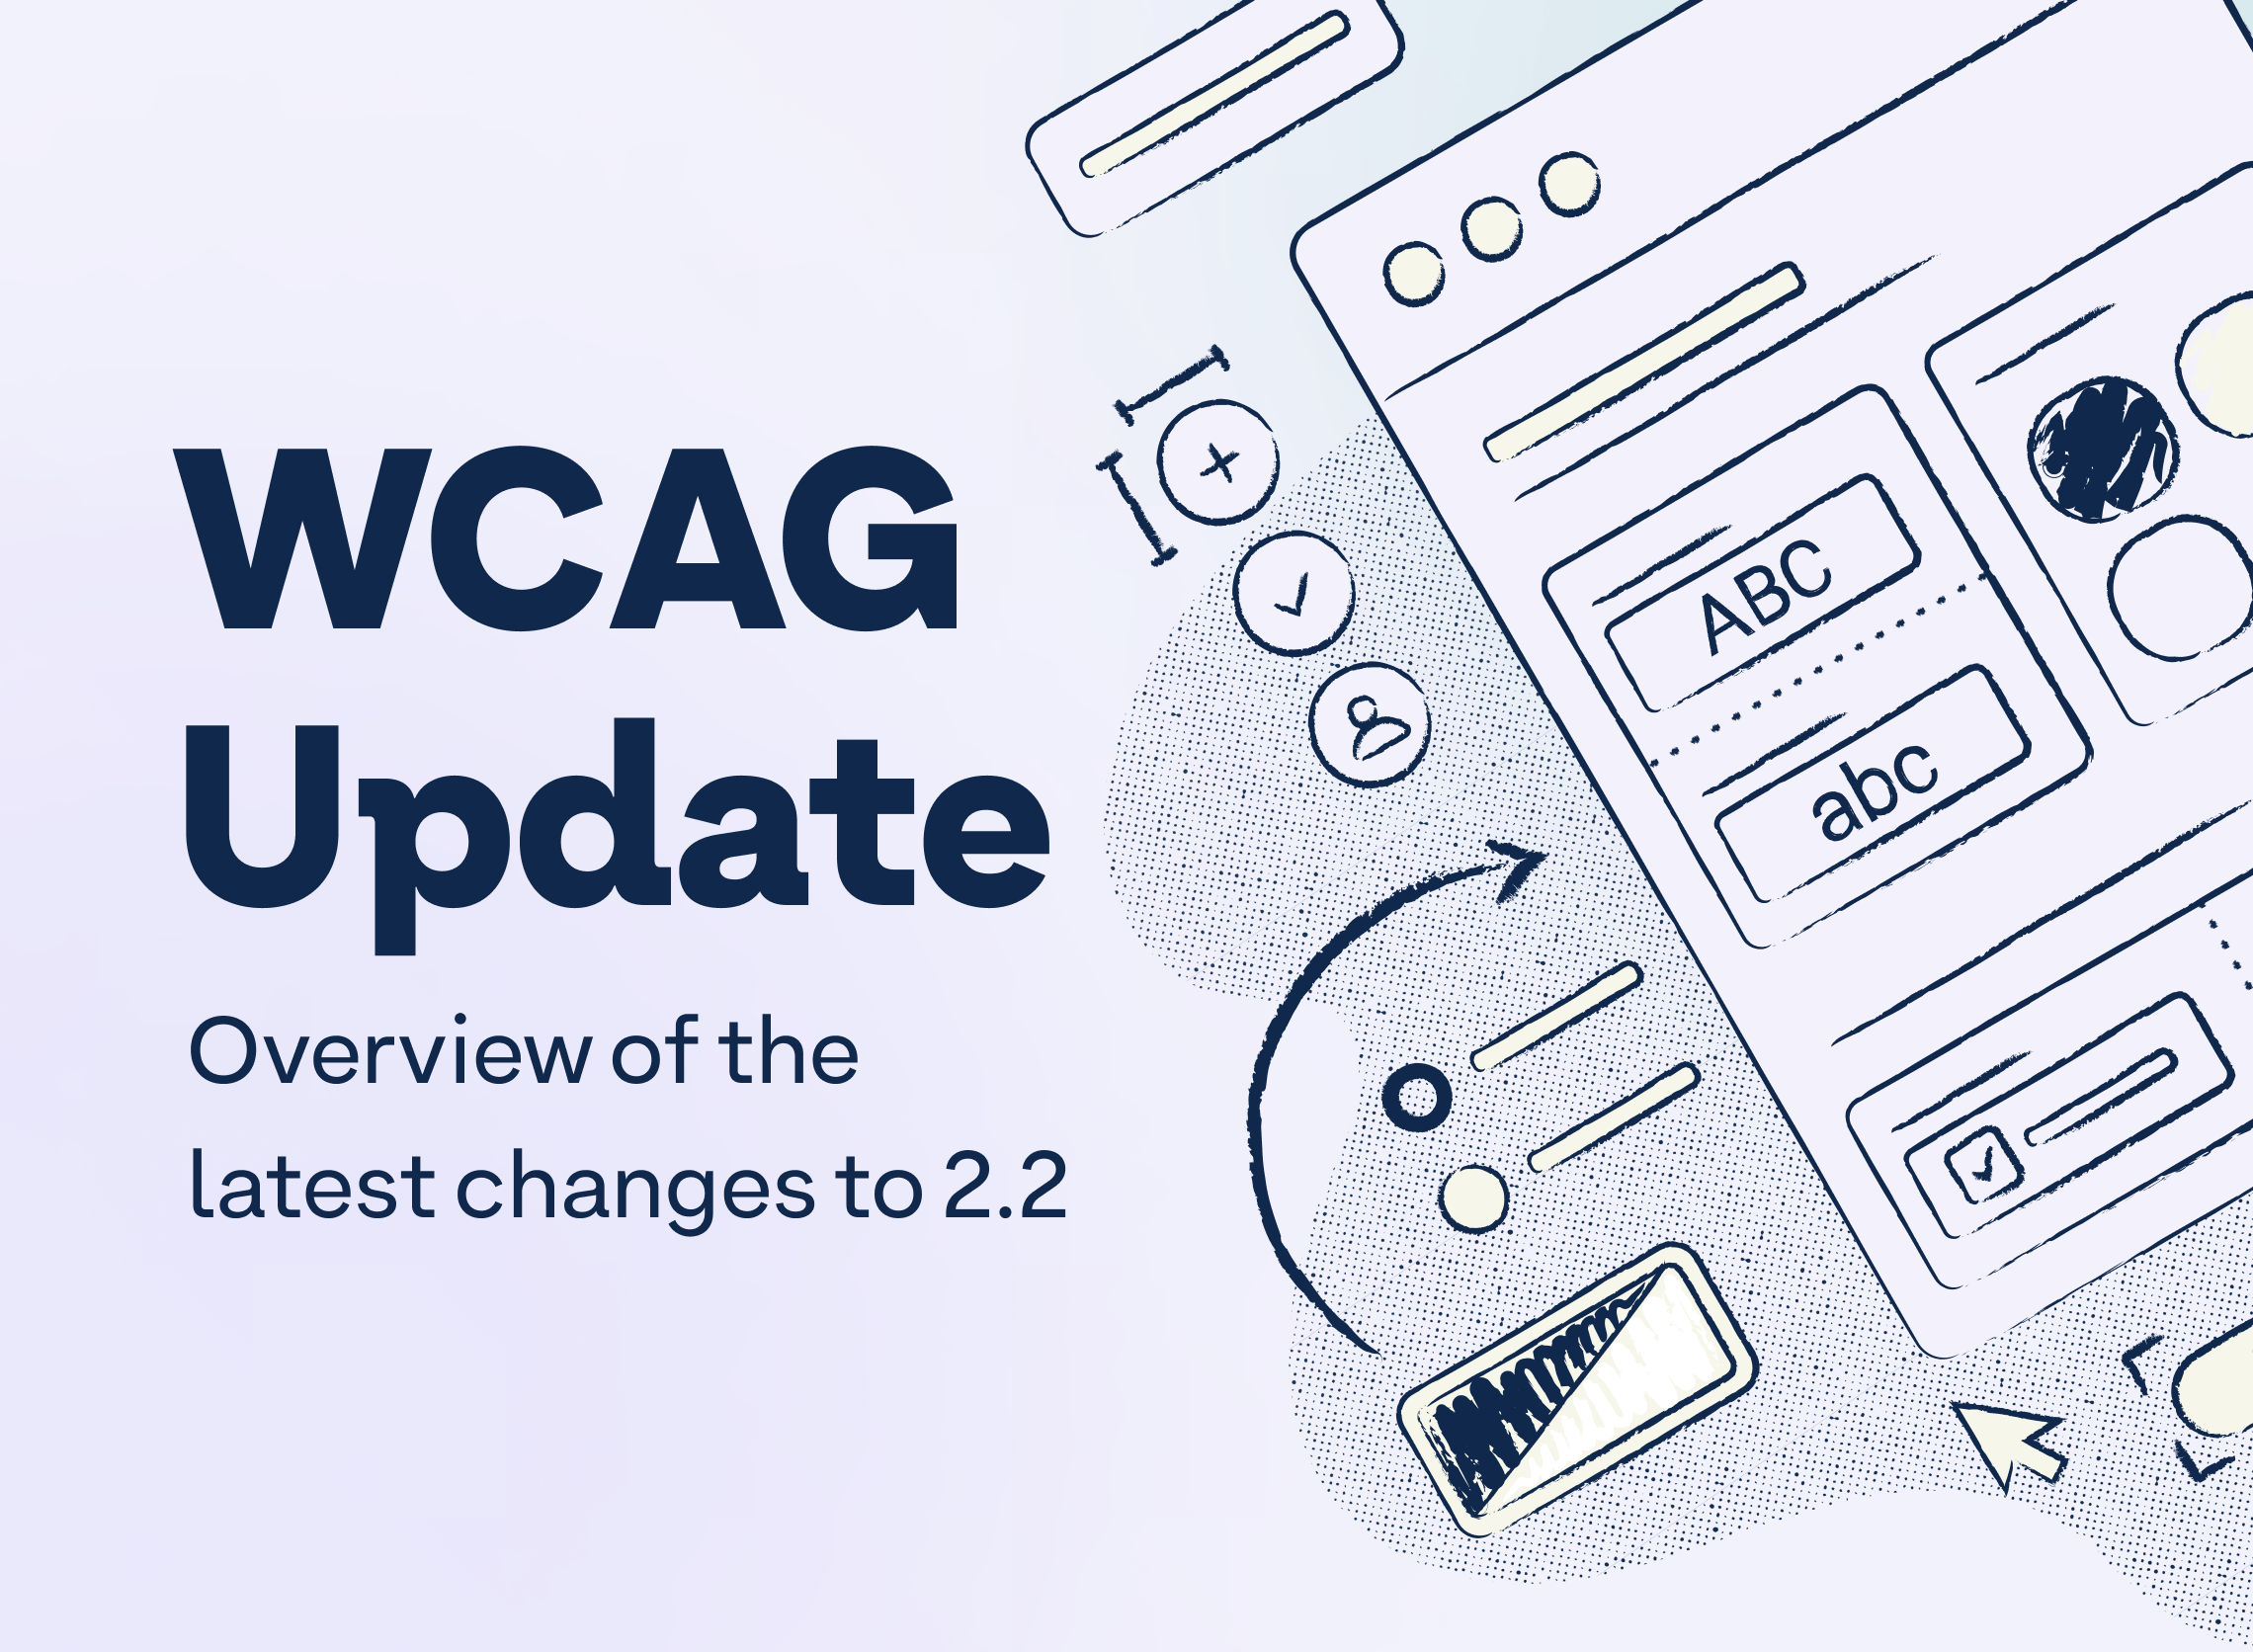 WCAG Update. Overview of the latest changes to 2.2. Decorative stylized web elements sit on the right of the frame.